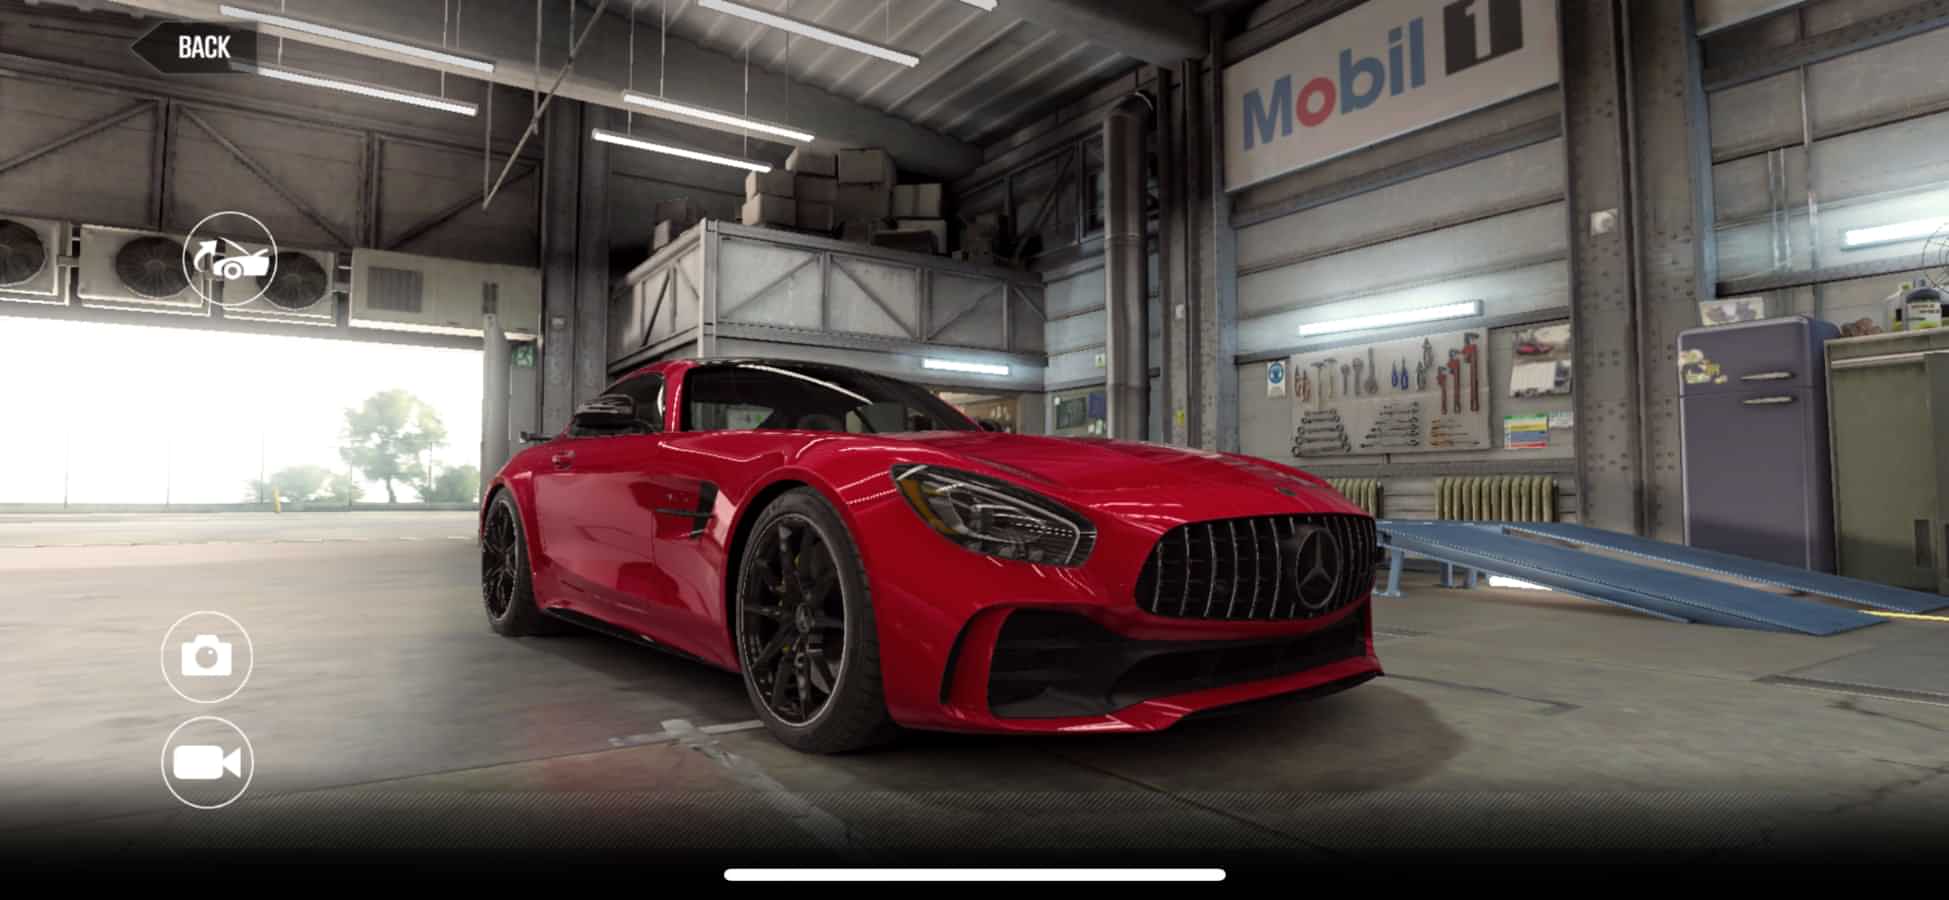 Mercedes Benz AMG GT R CSR2, tune and shift pattern